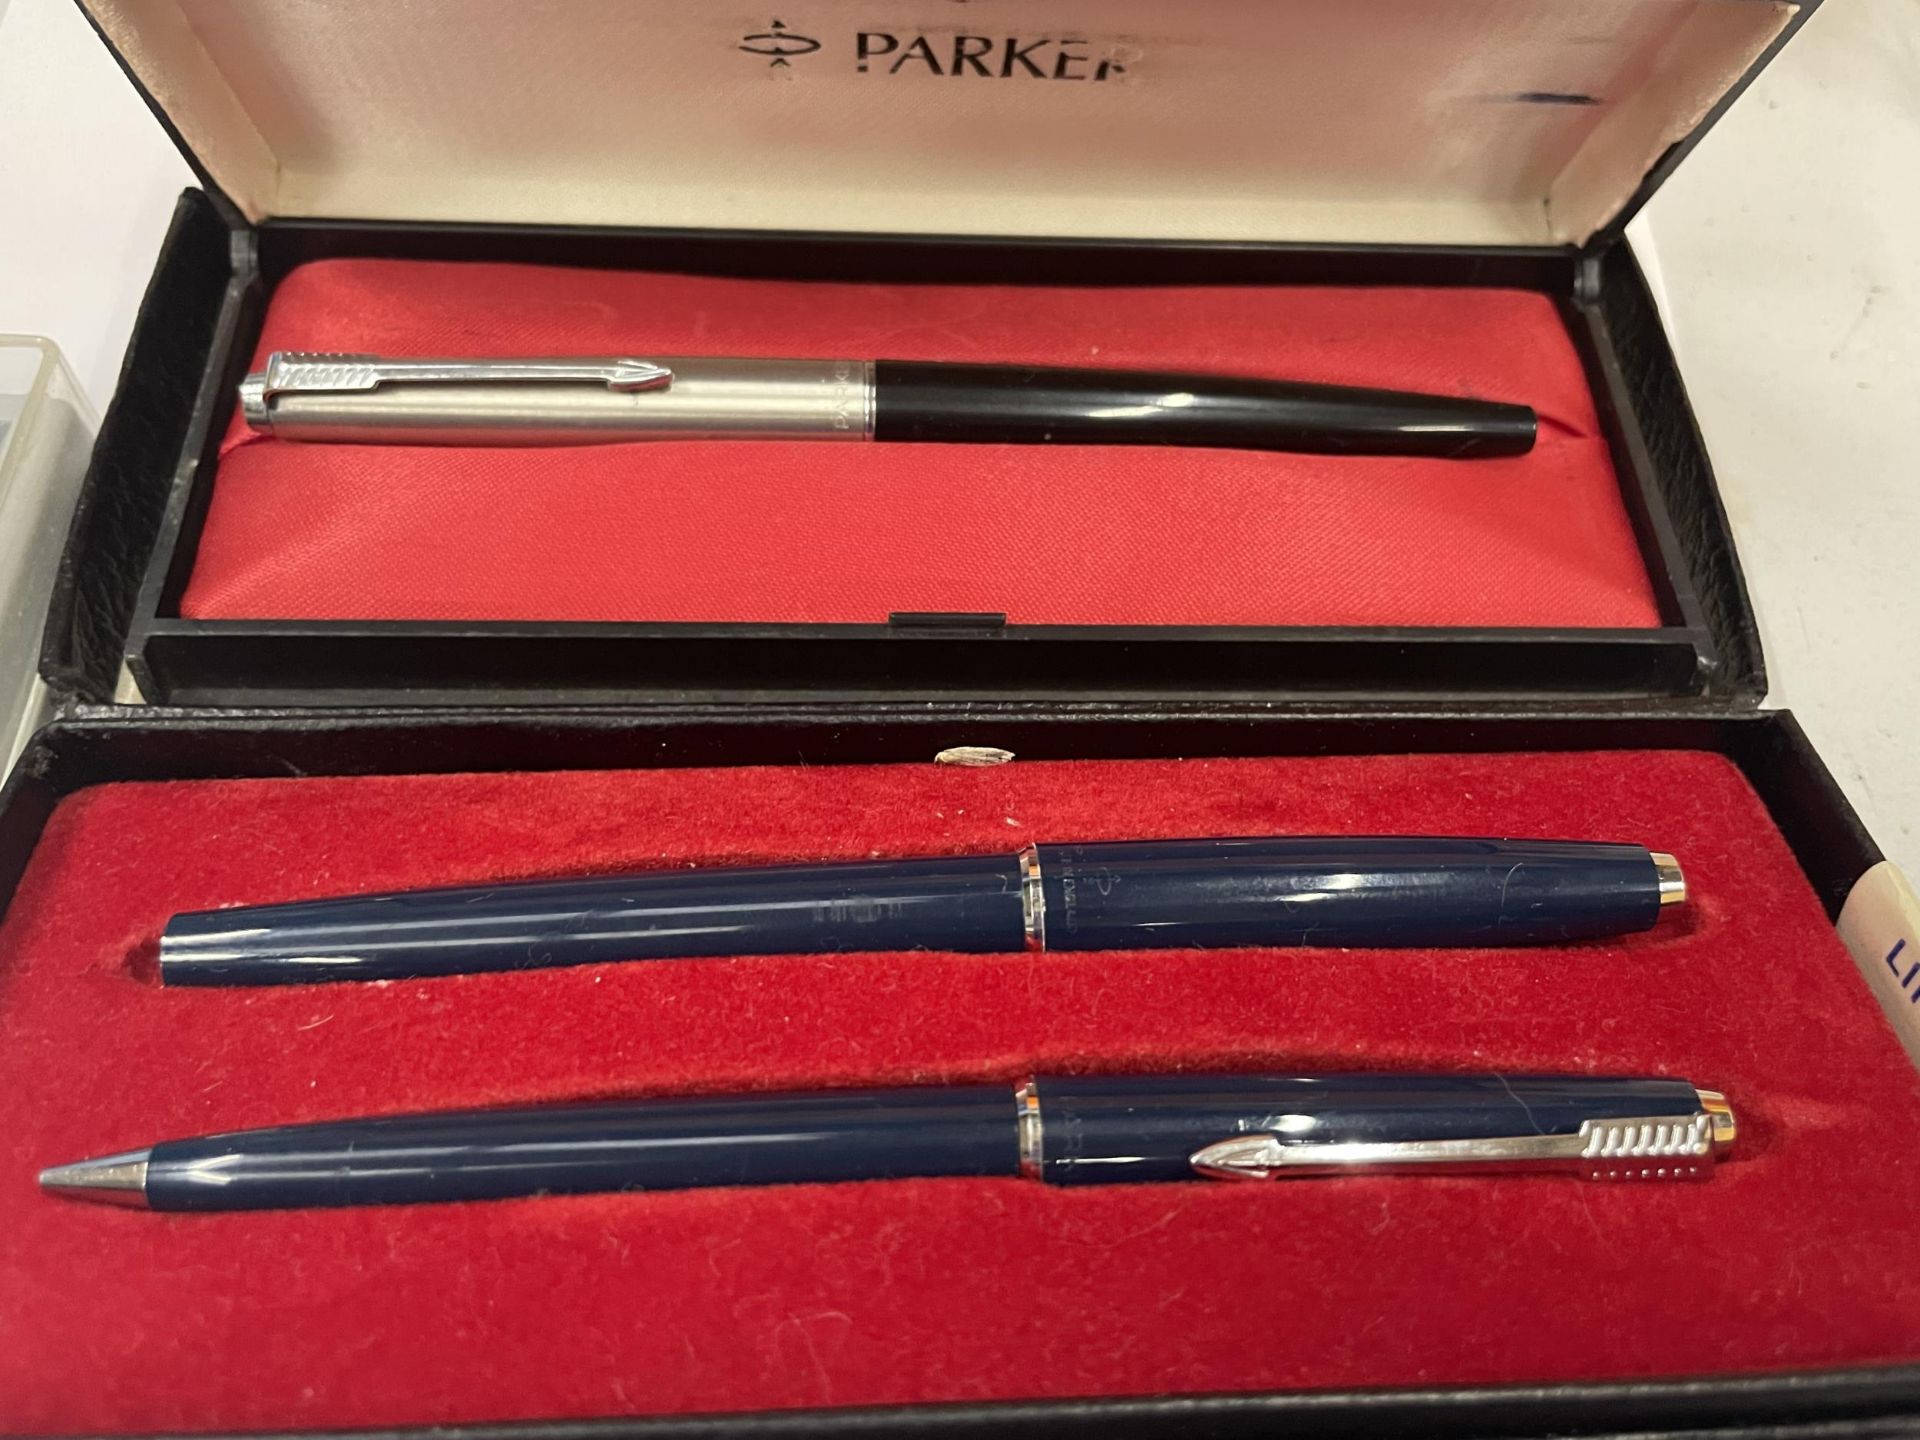 FIVE BOXED PARKER PENS TO INCLUDE FOUNTAIN, BALLPOINT, ROLLER BALL ETC - Image 2 of 5